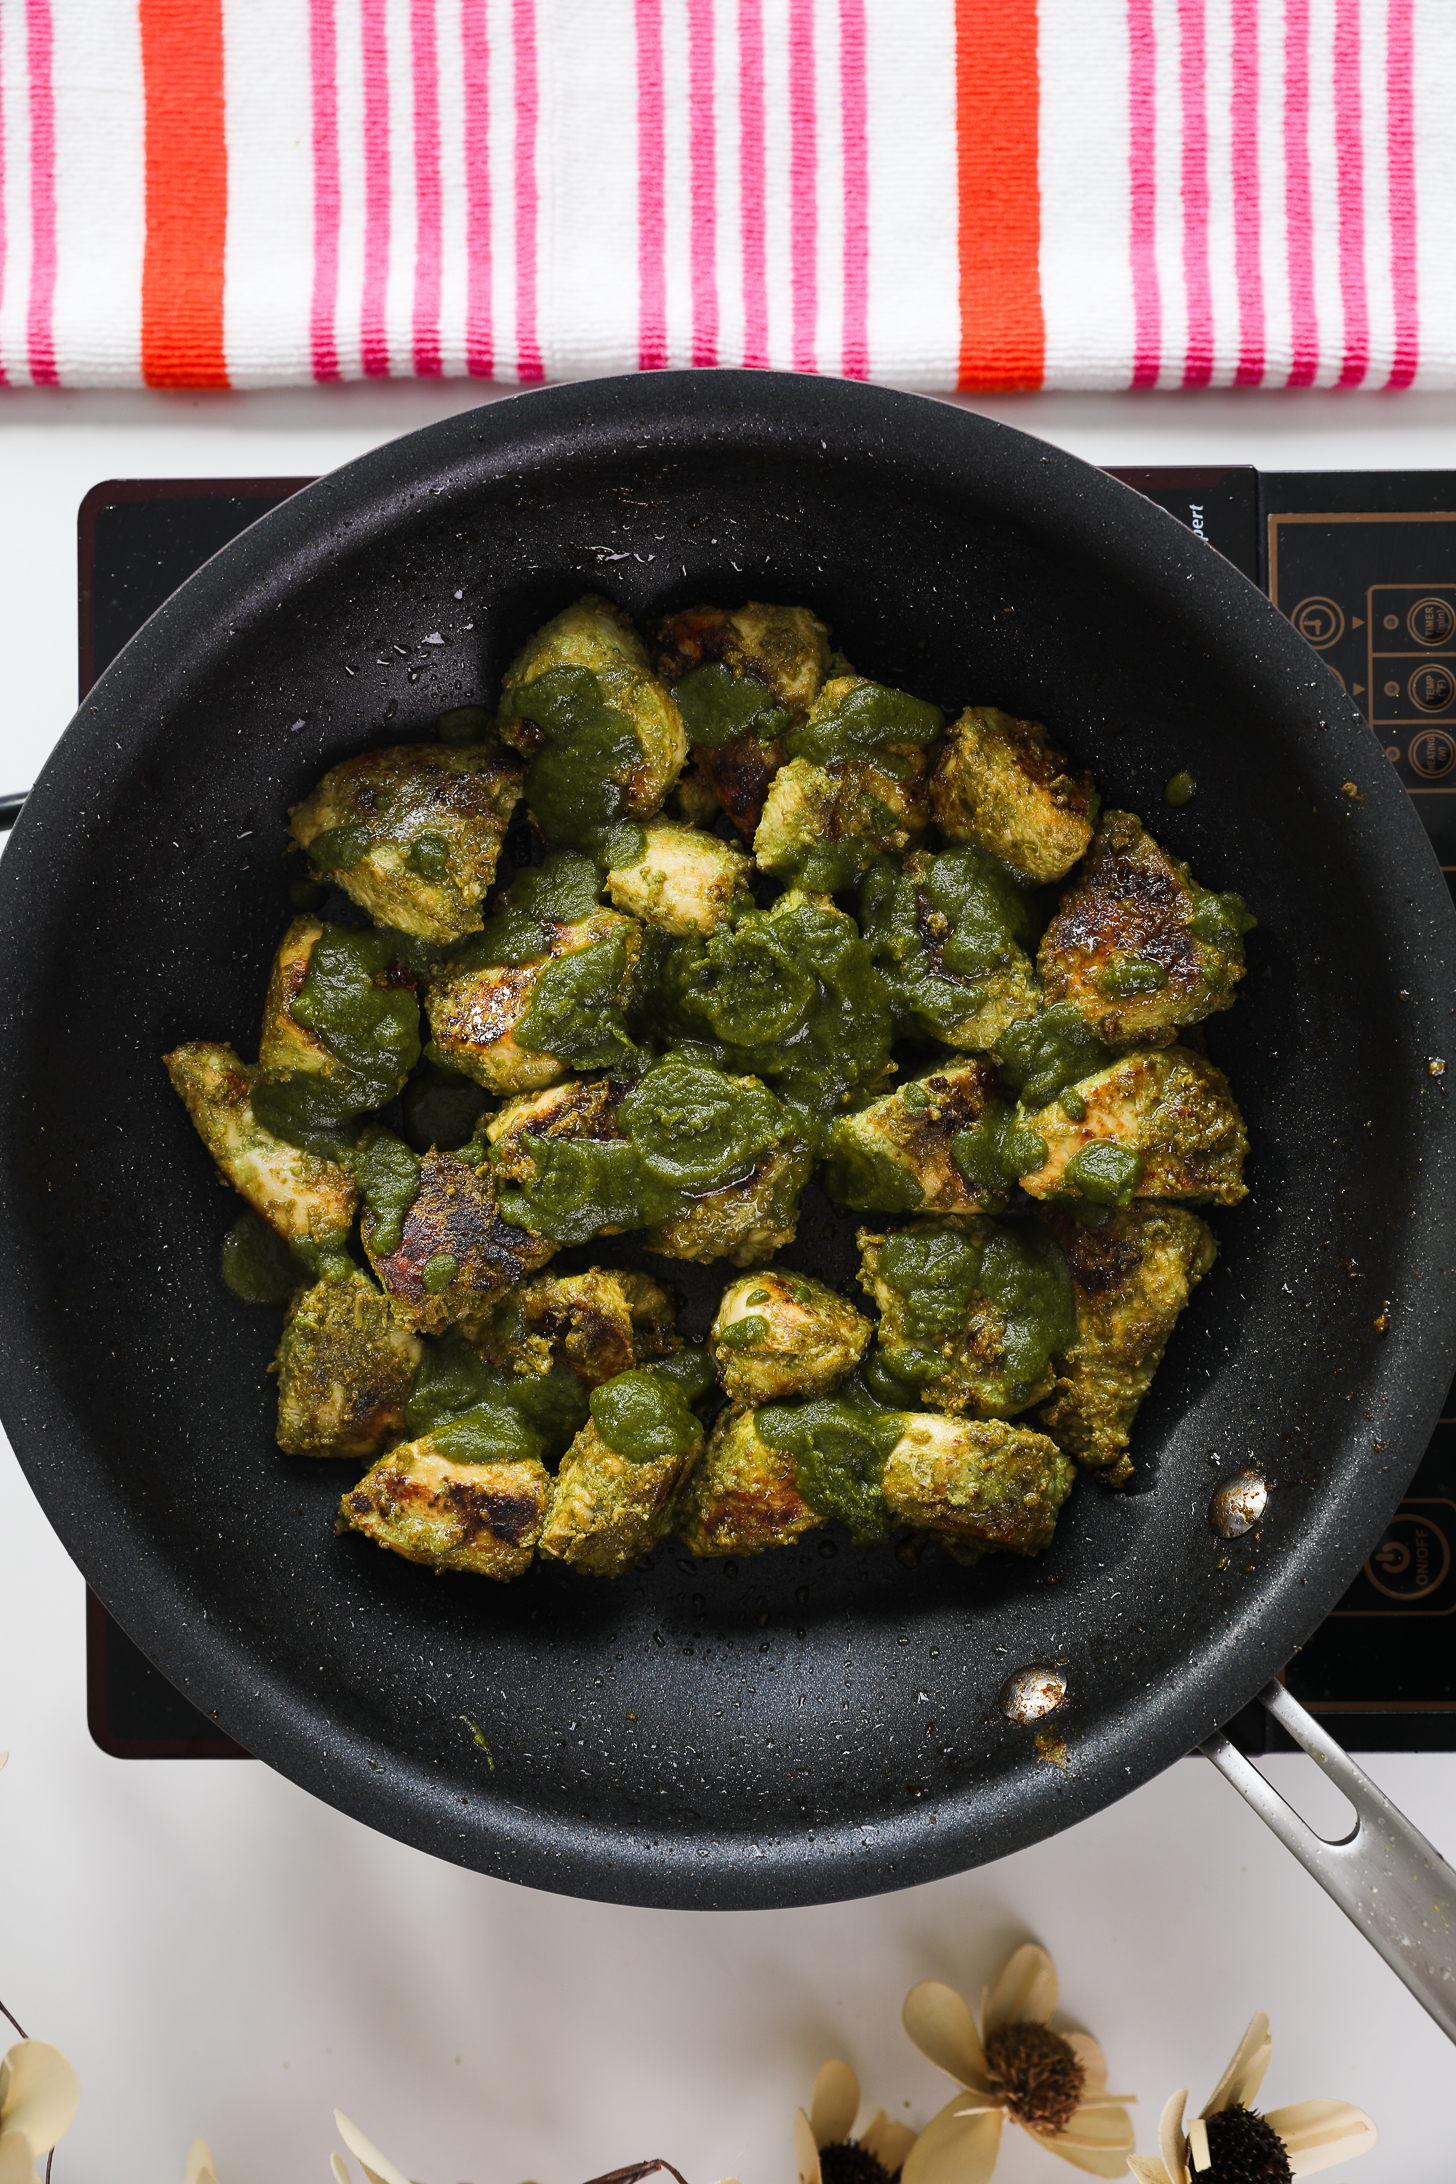 Pan of cooked and charred green masala-coated chicken breast pieces topped with green hara masala sauce.